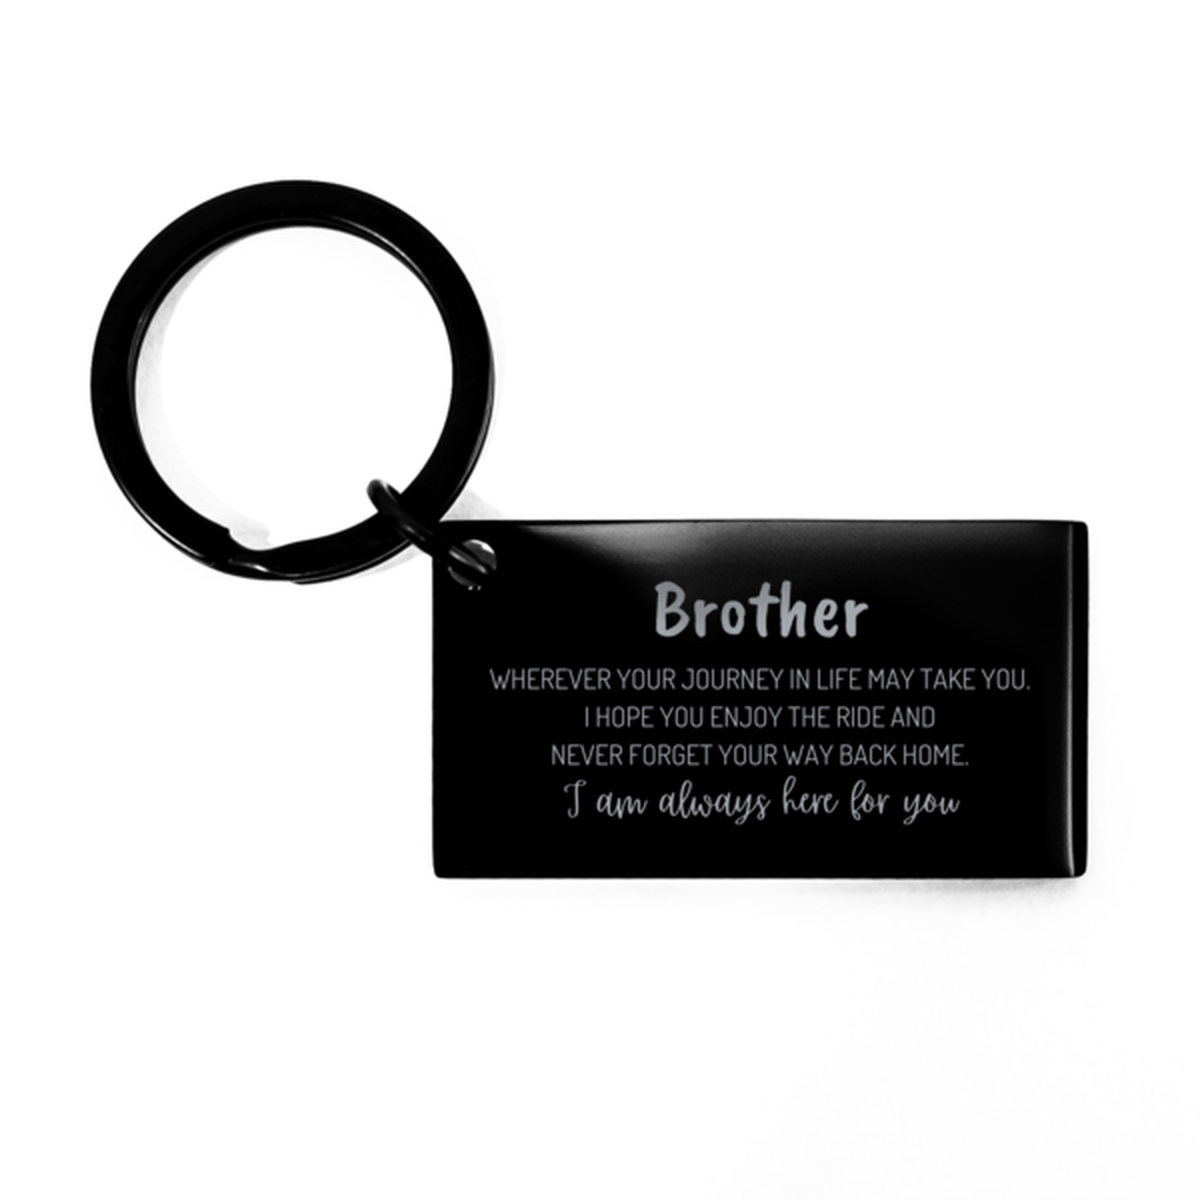 Brother wherever your journey in life may take you, I am always here for you Brother Keychain, Awesome Christmas Gifts For Brother, Brother Birthday Gifts for Men Women Family Loved One